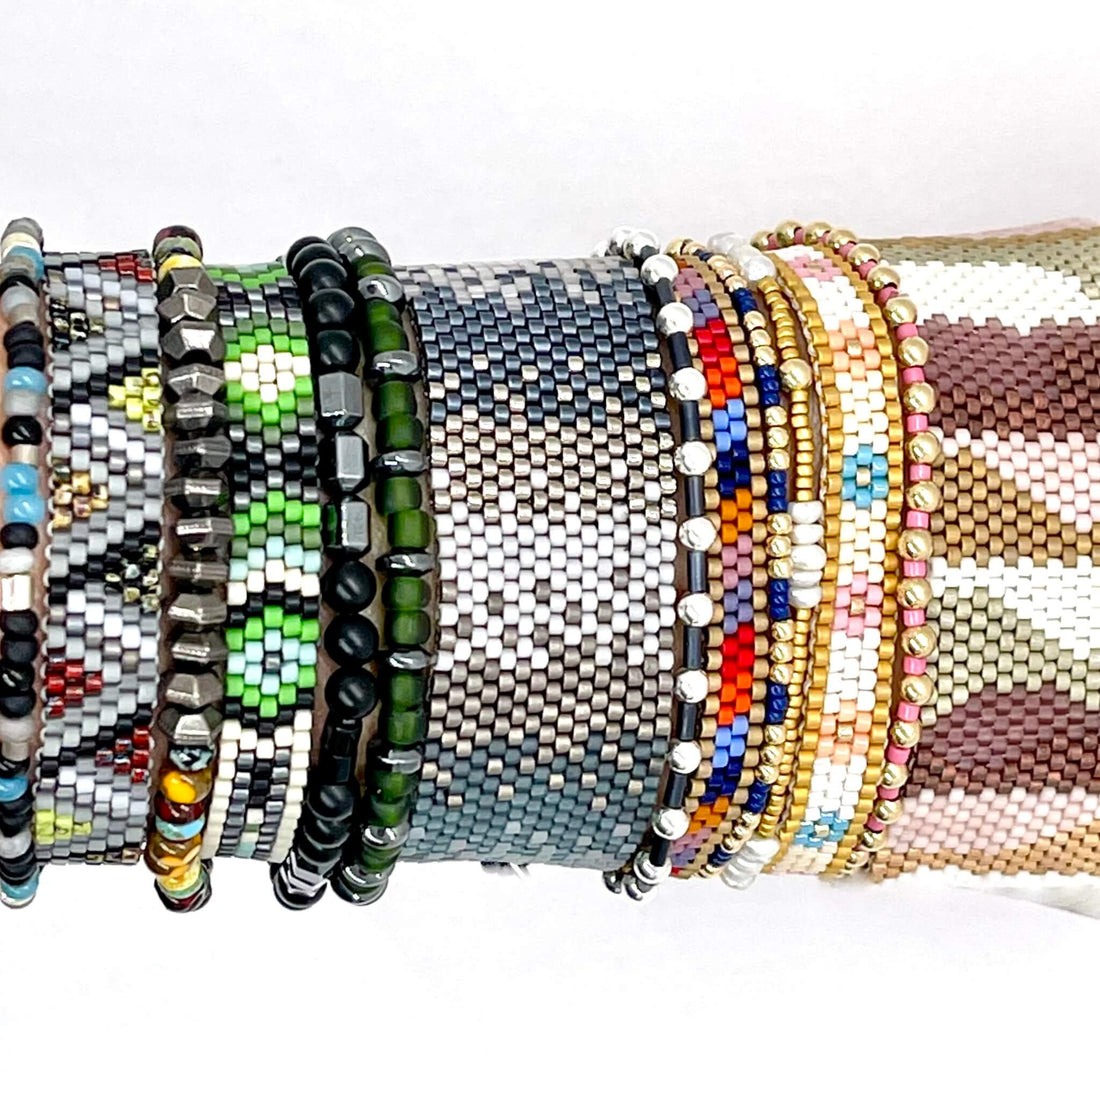 Seed Beads: How to Create Beaded Jewelry that Lasts